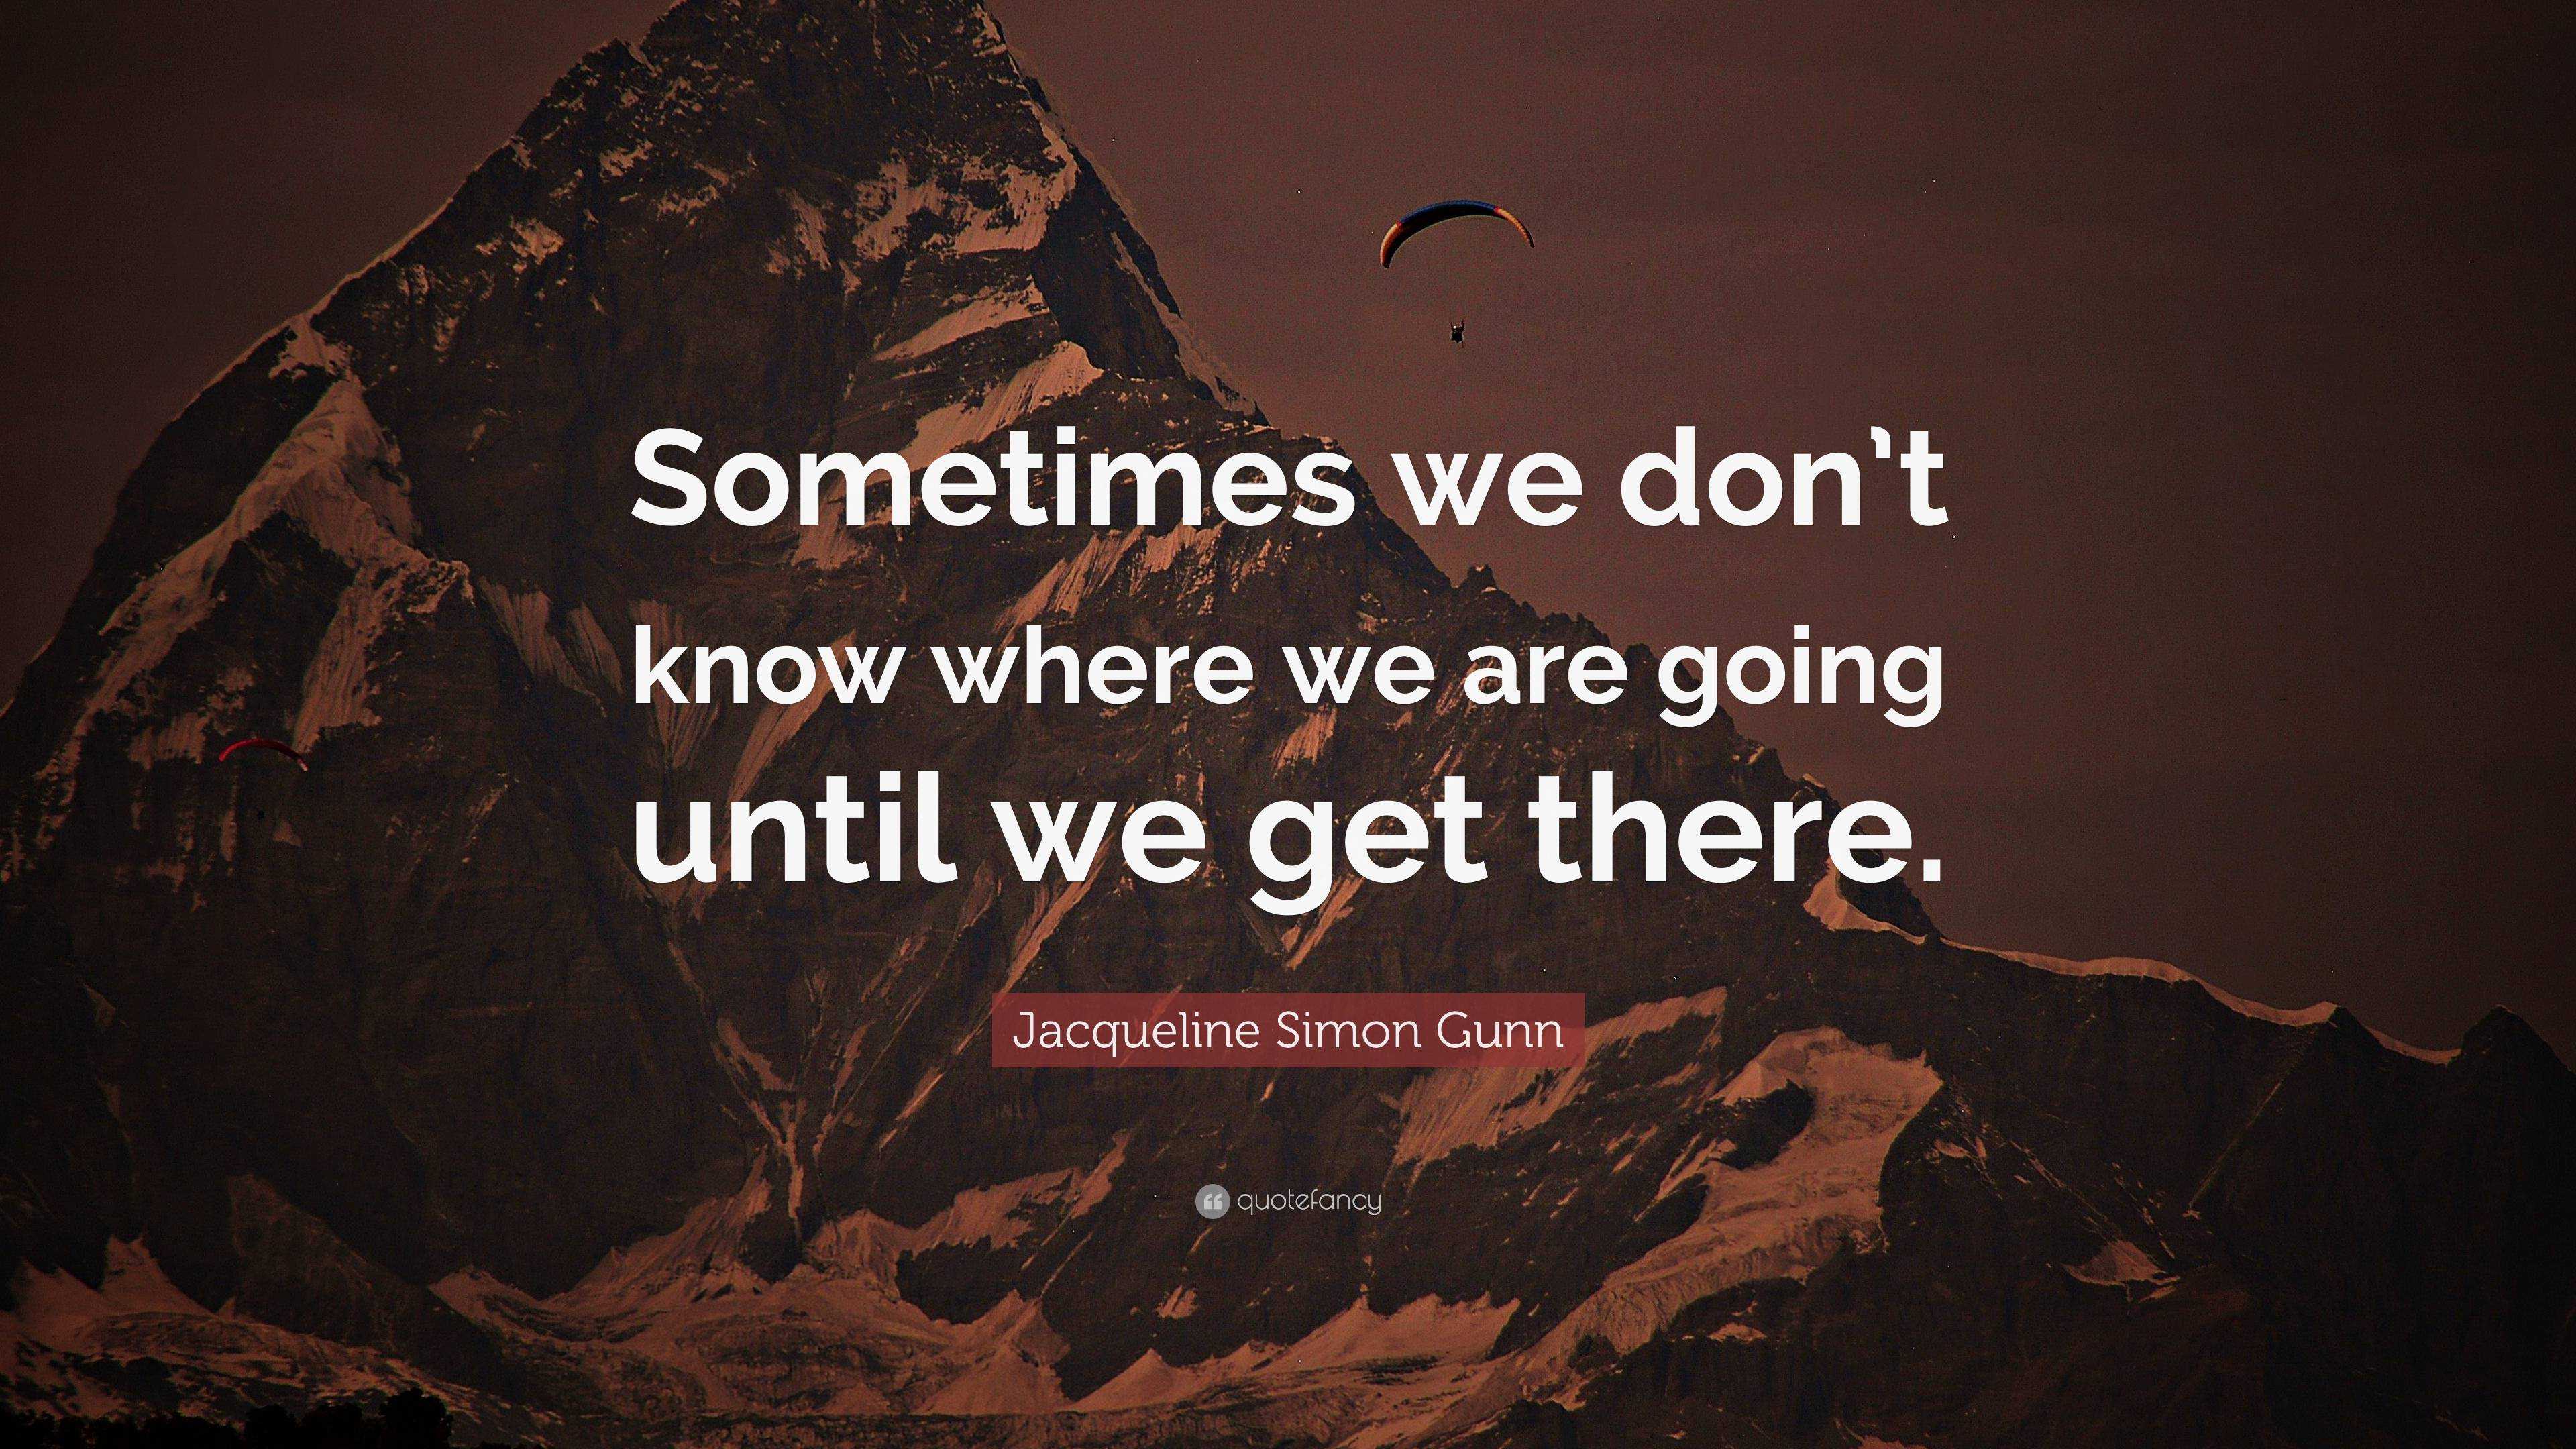 Jacqueline Simon Gunn Quote: “Sometimes we don’t know where we are ...